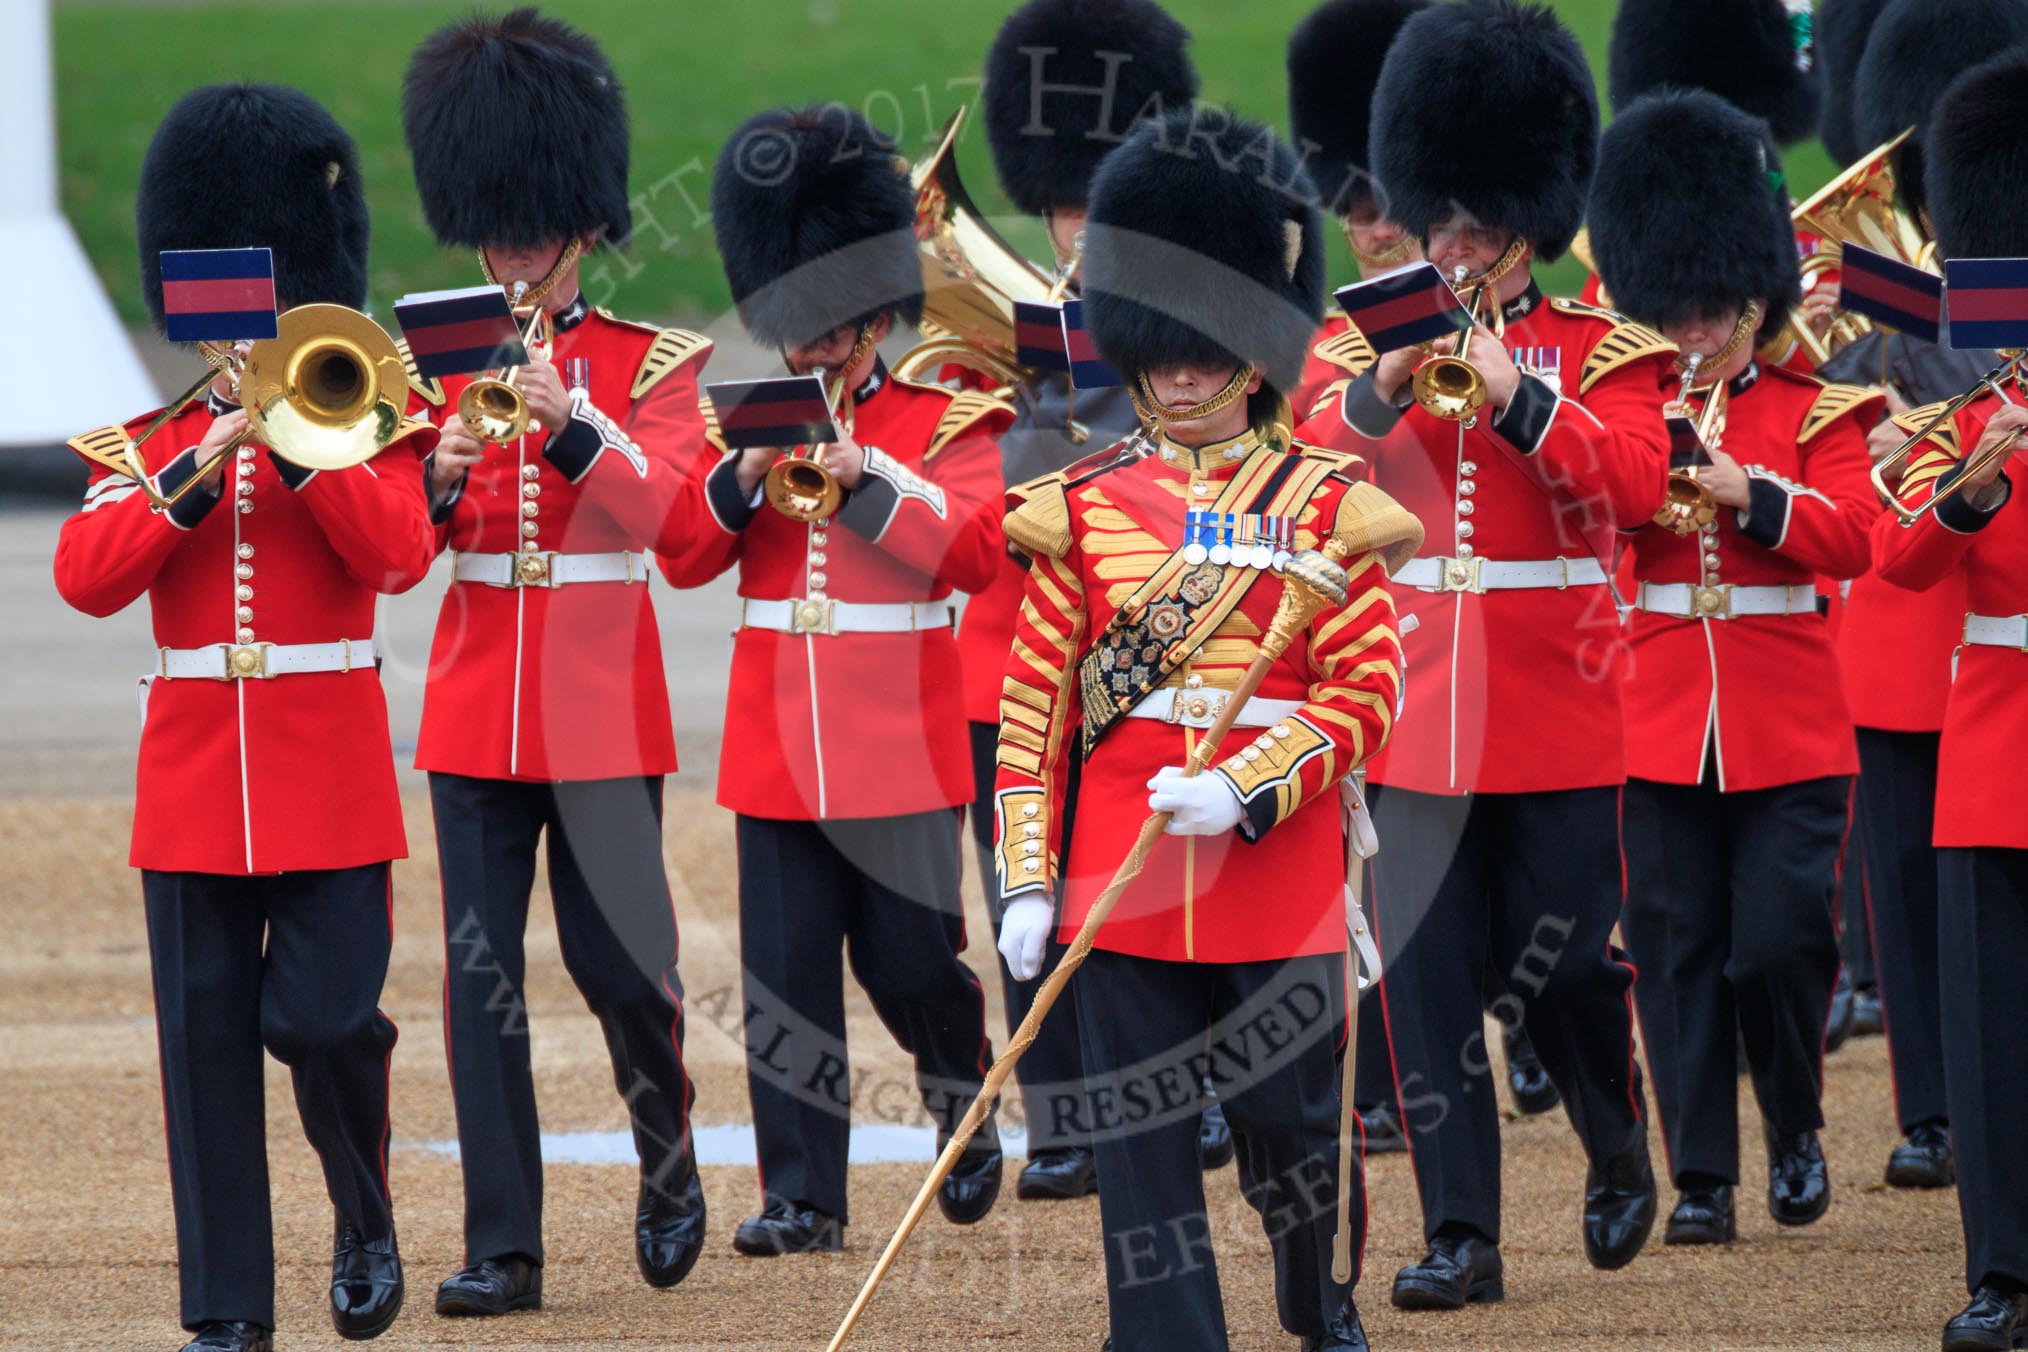 Senior Drum Major Damian Thomas, leading the Band of the Welsh Guards into position on Horse Guards Parade, during The Colonel's Review 2018 (final rehearsal for Trooping the Colour, The Queen's Birthday Parade)  at Horse Guards Parade, Westminster, London, 2 June 2018, 10:13.